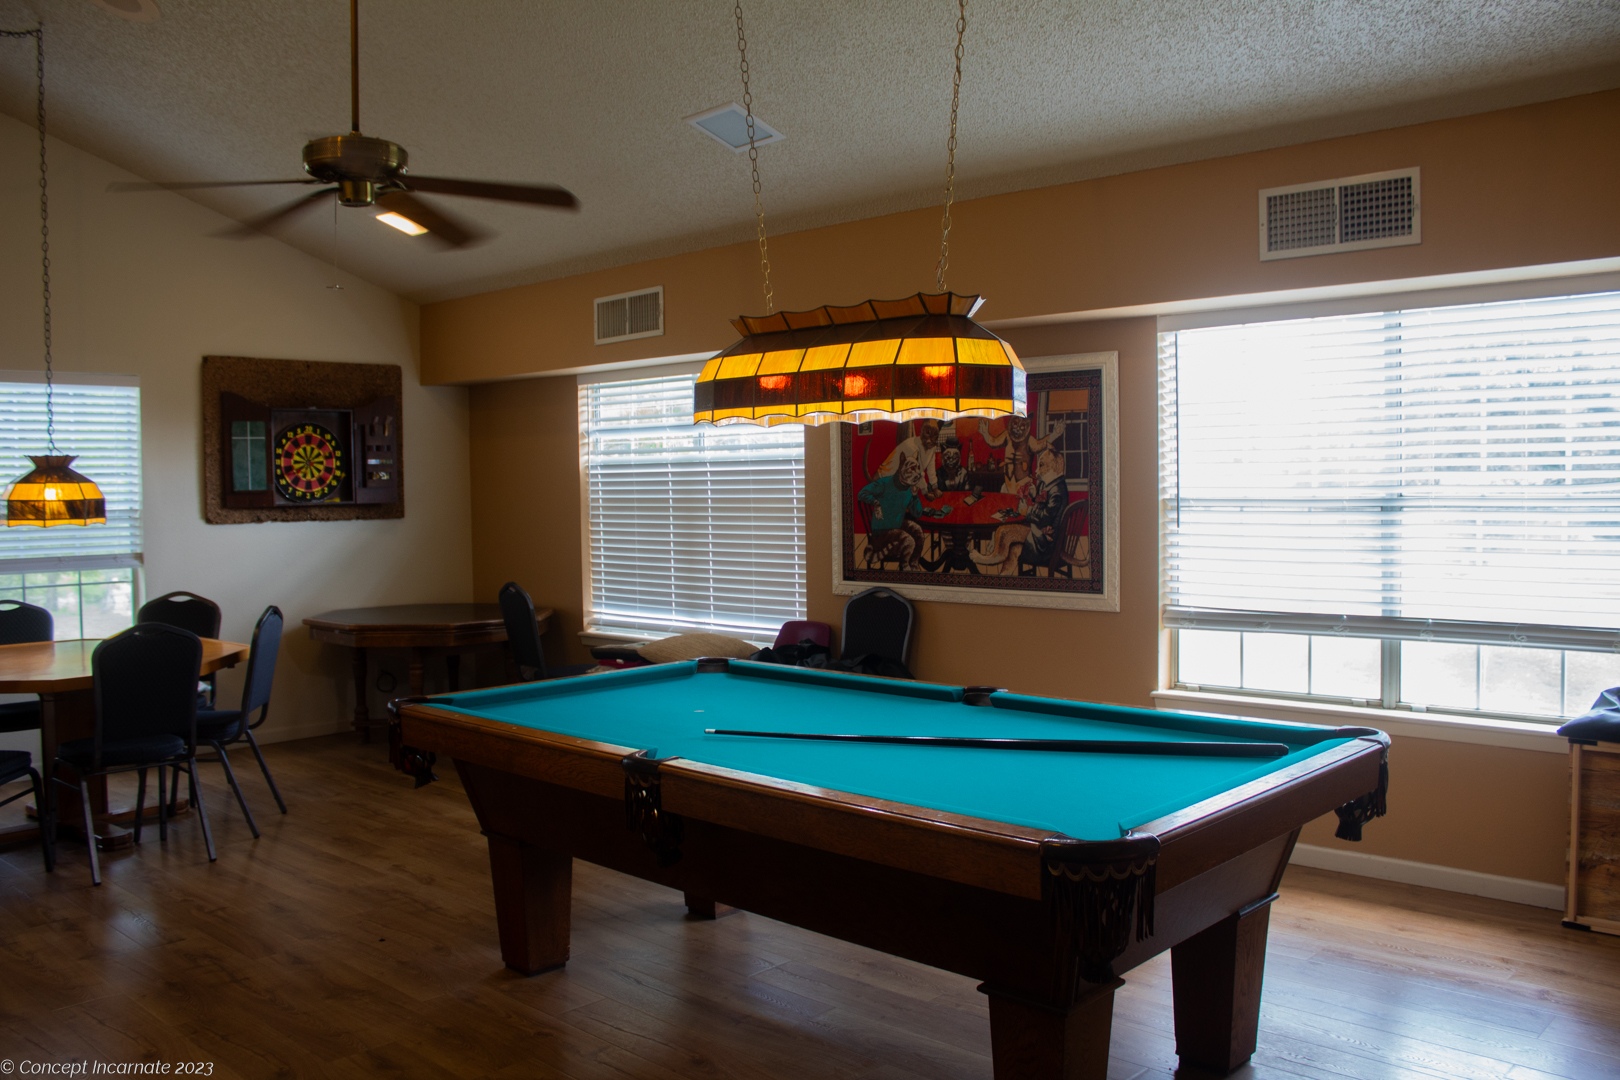 Pool table with overhead antique light